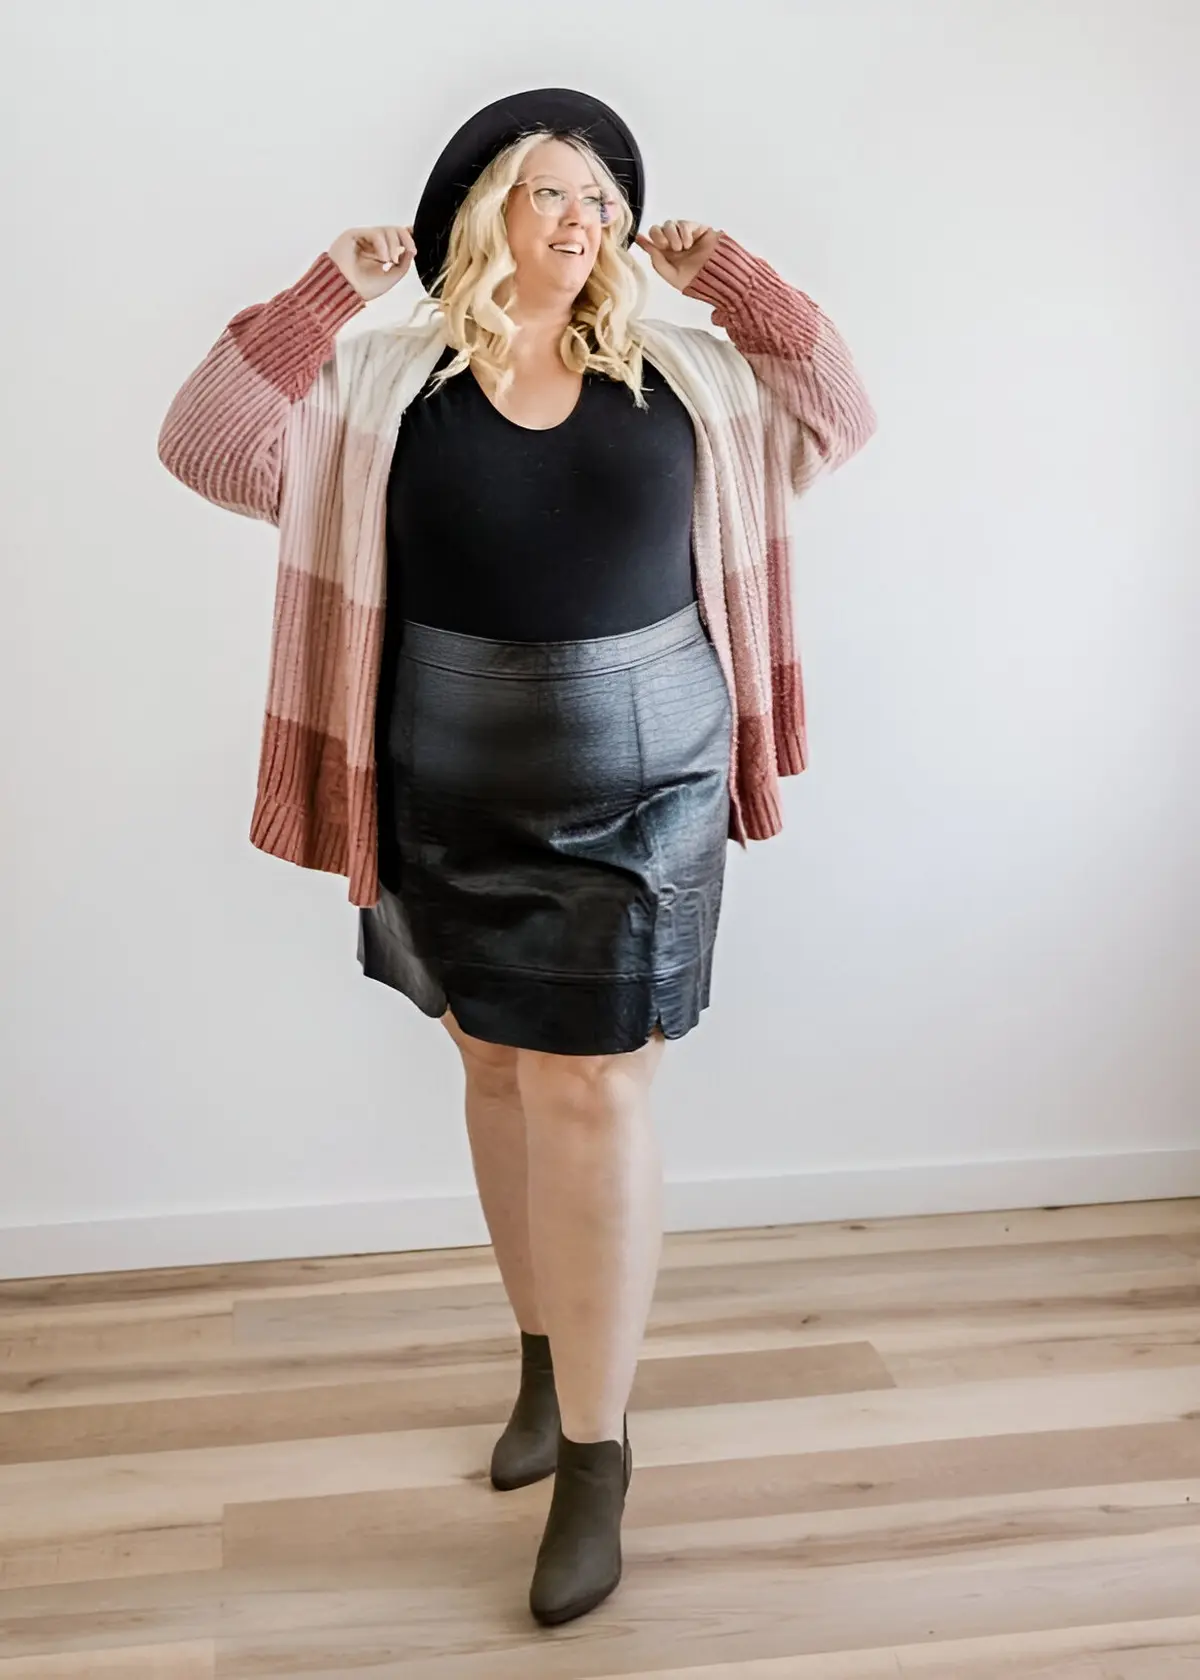 longer cardigan paired with black skirt and top make look thinner